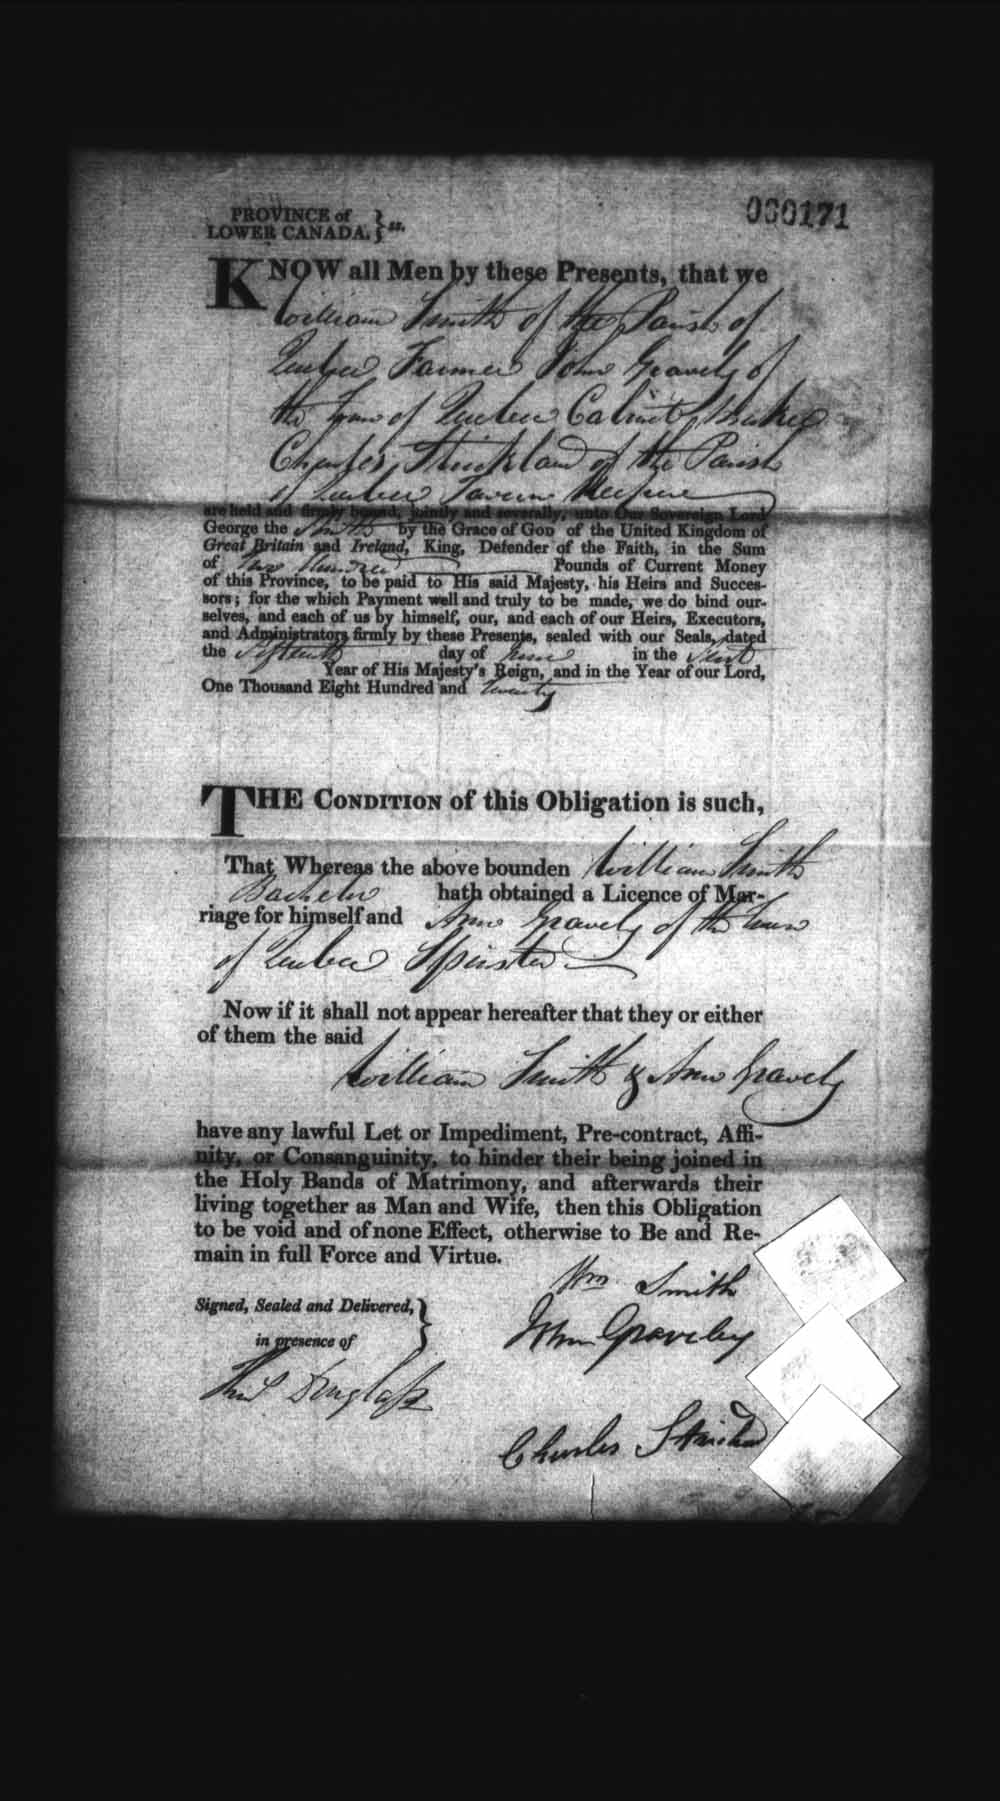 Digitized page of Upper and Lower Canada Marriage Bonds (1779-1865) for Image No.: e008236016